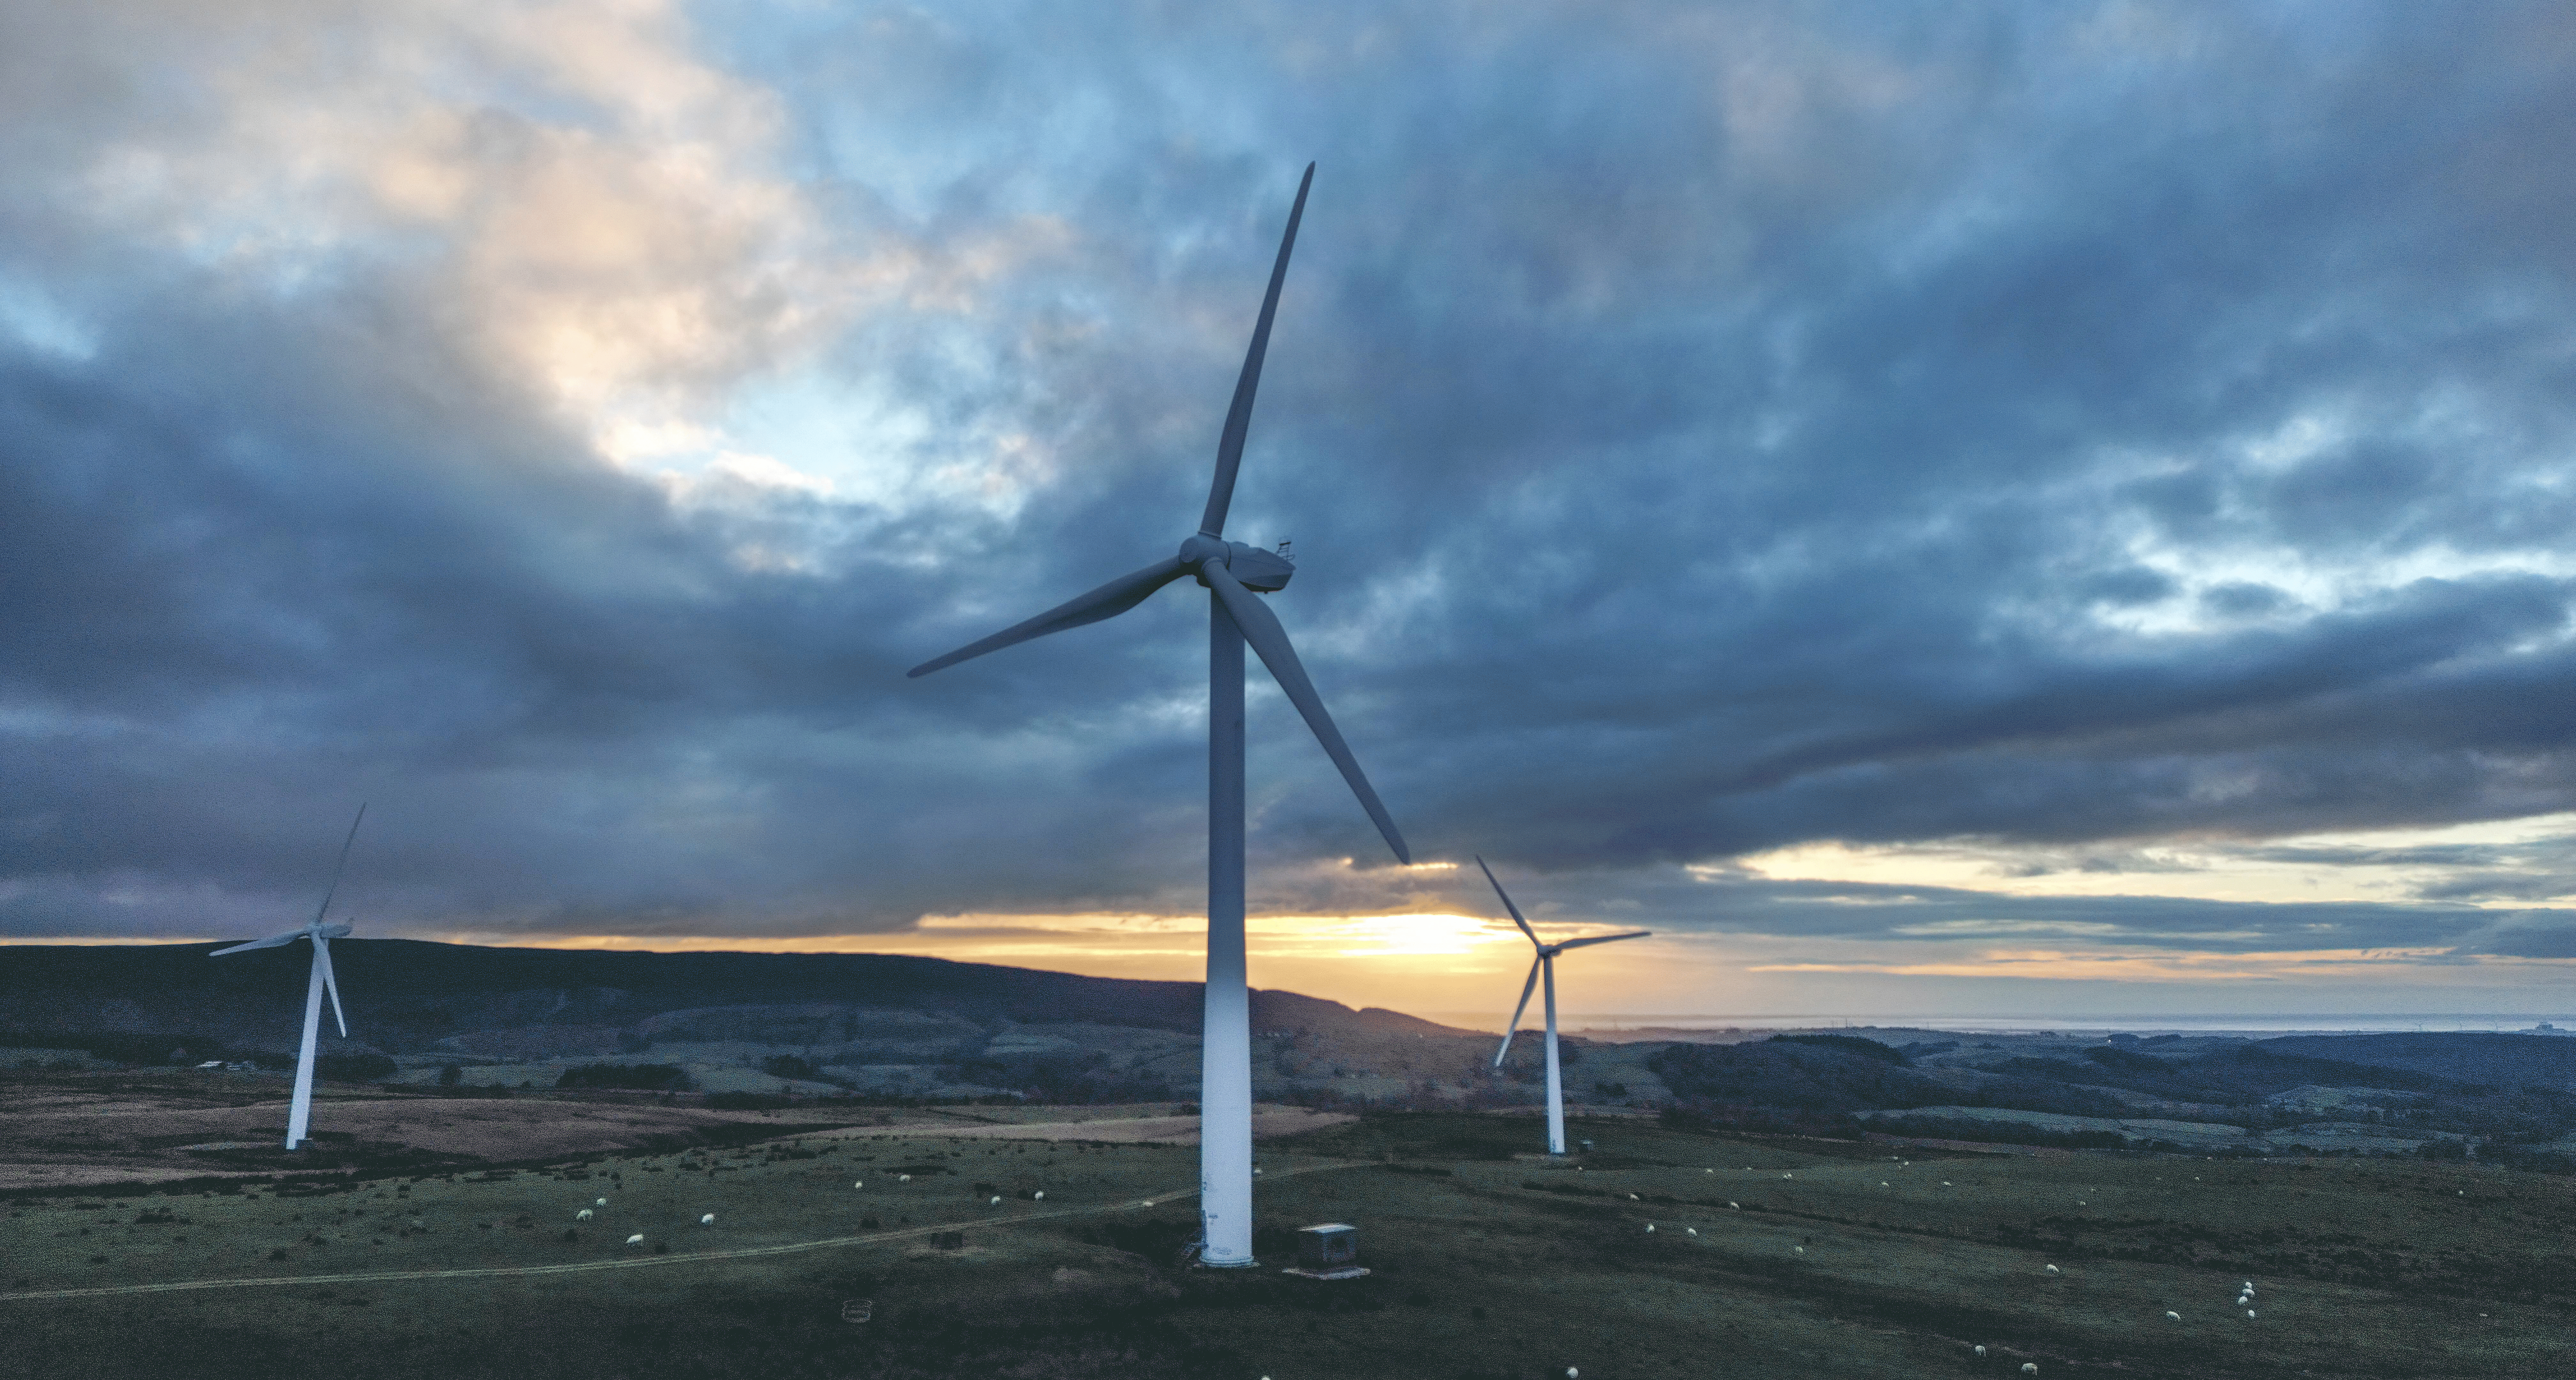 The public wants more onshore wind, so why is the Government dithering?